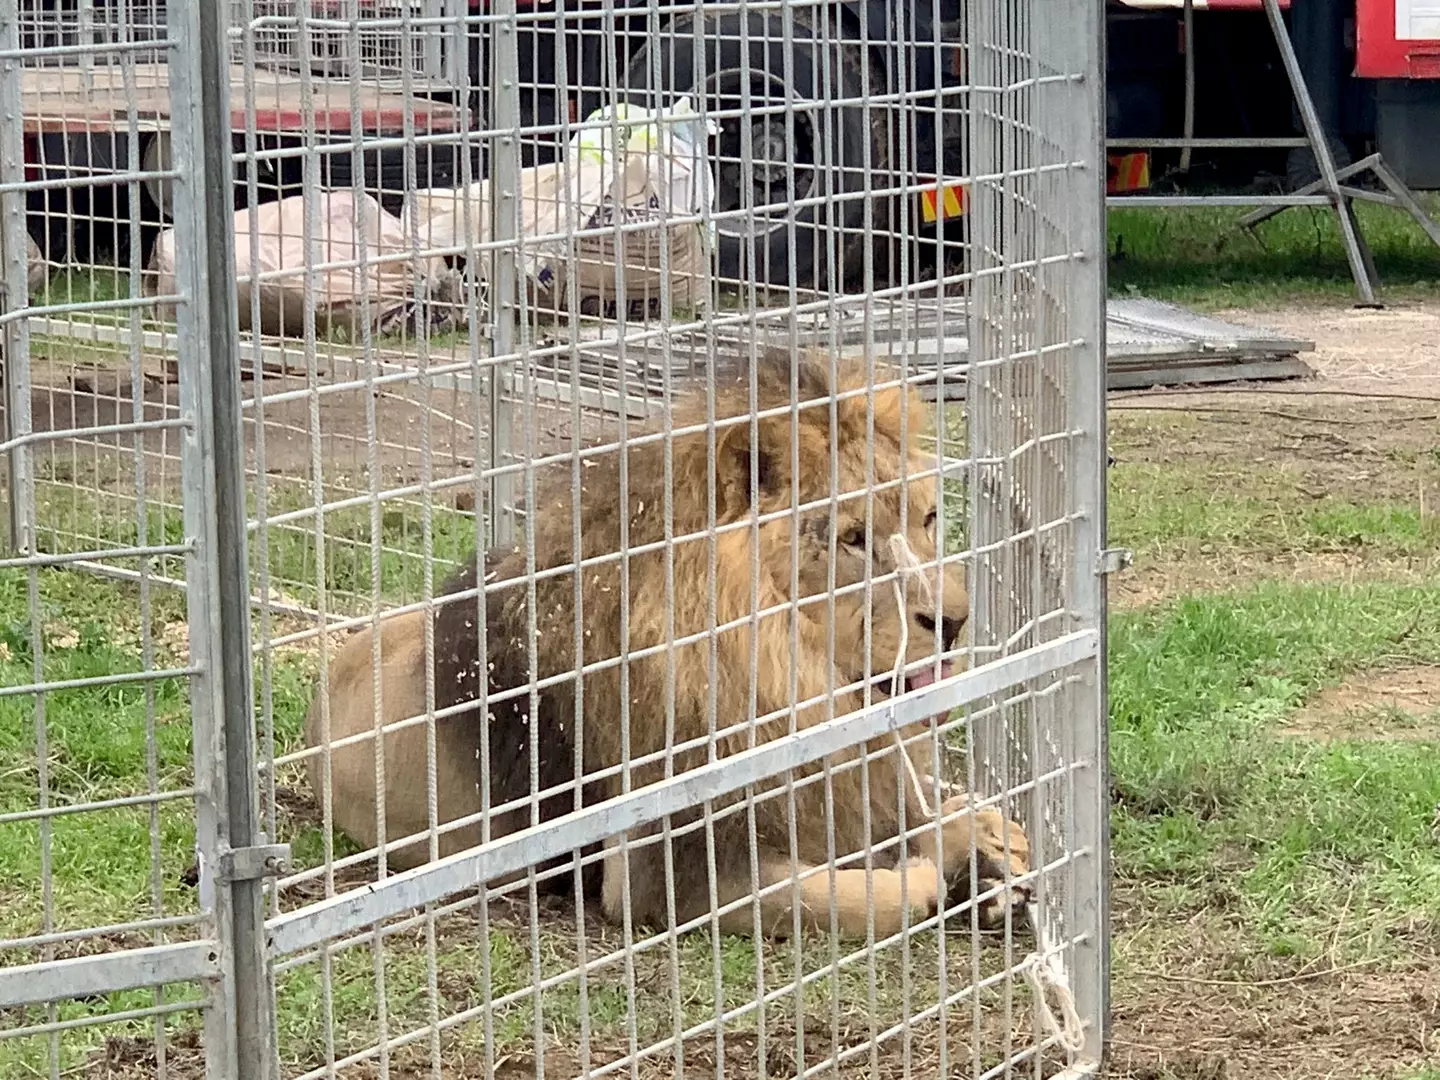 Kimba the lion was on the loose for five hours.